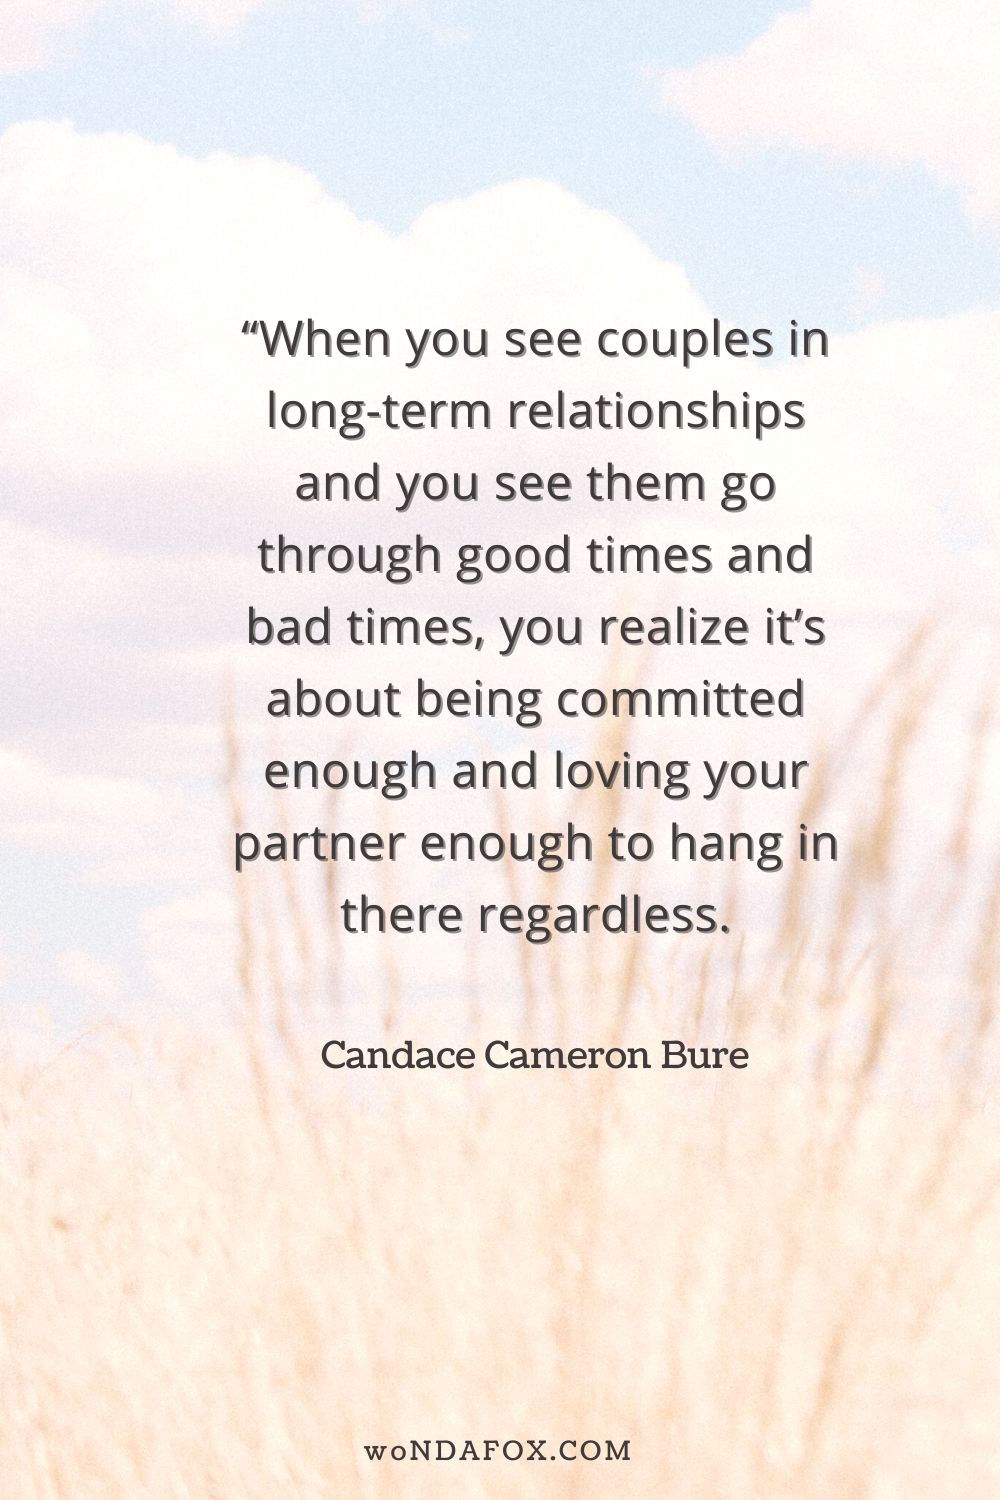 “When you see couples in long-term relationships and you see them go through good times and bad times, you realize it’s about being committed enough and loving your partner enough to hang in there regardless.” 